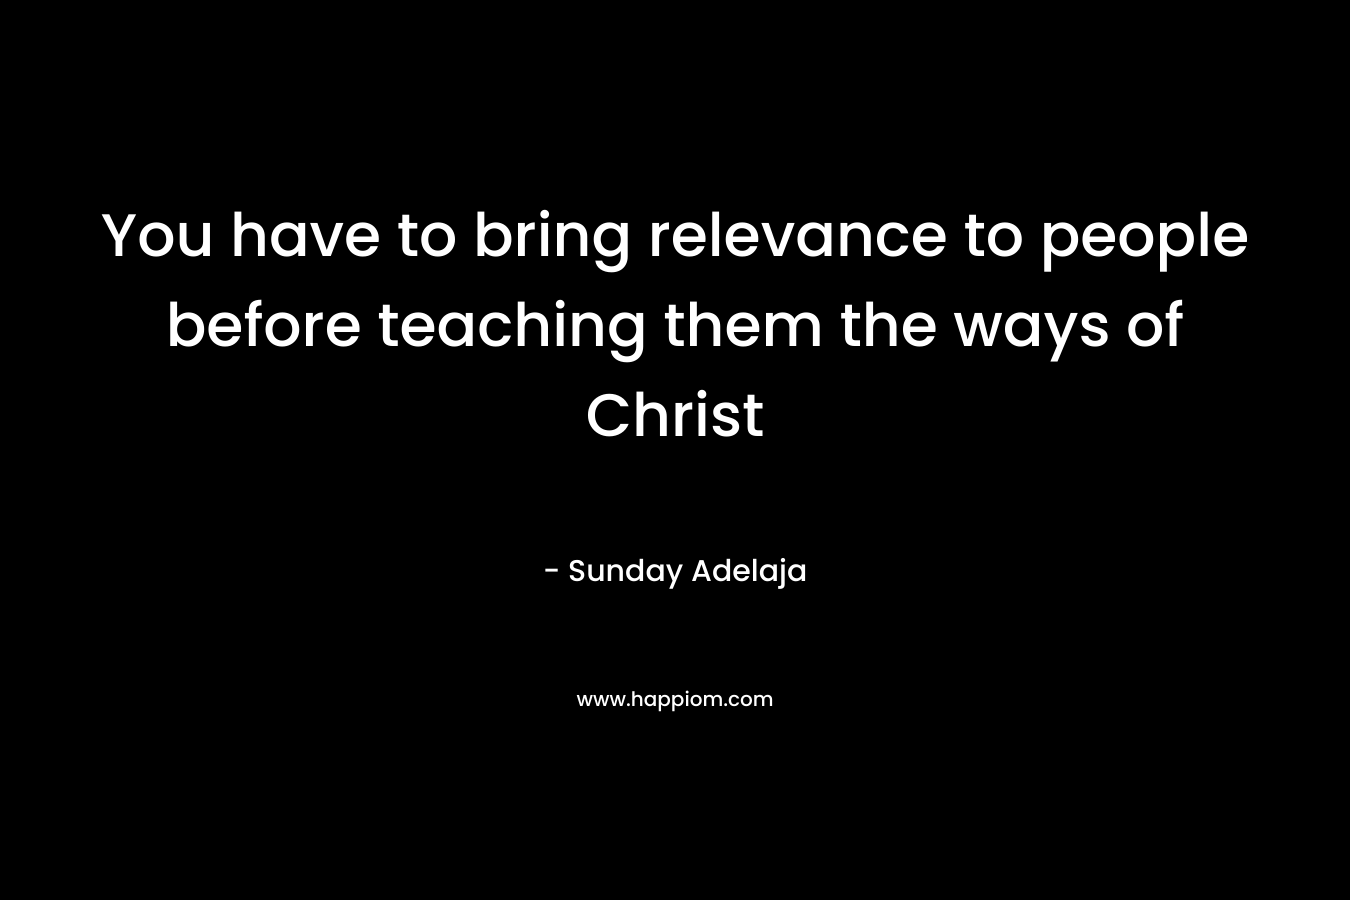 You have to bring relevance to people before teaching them the ways of Christ